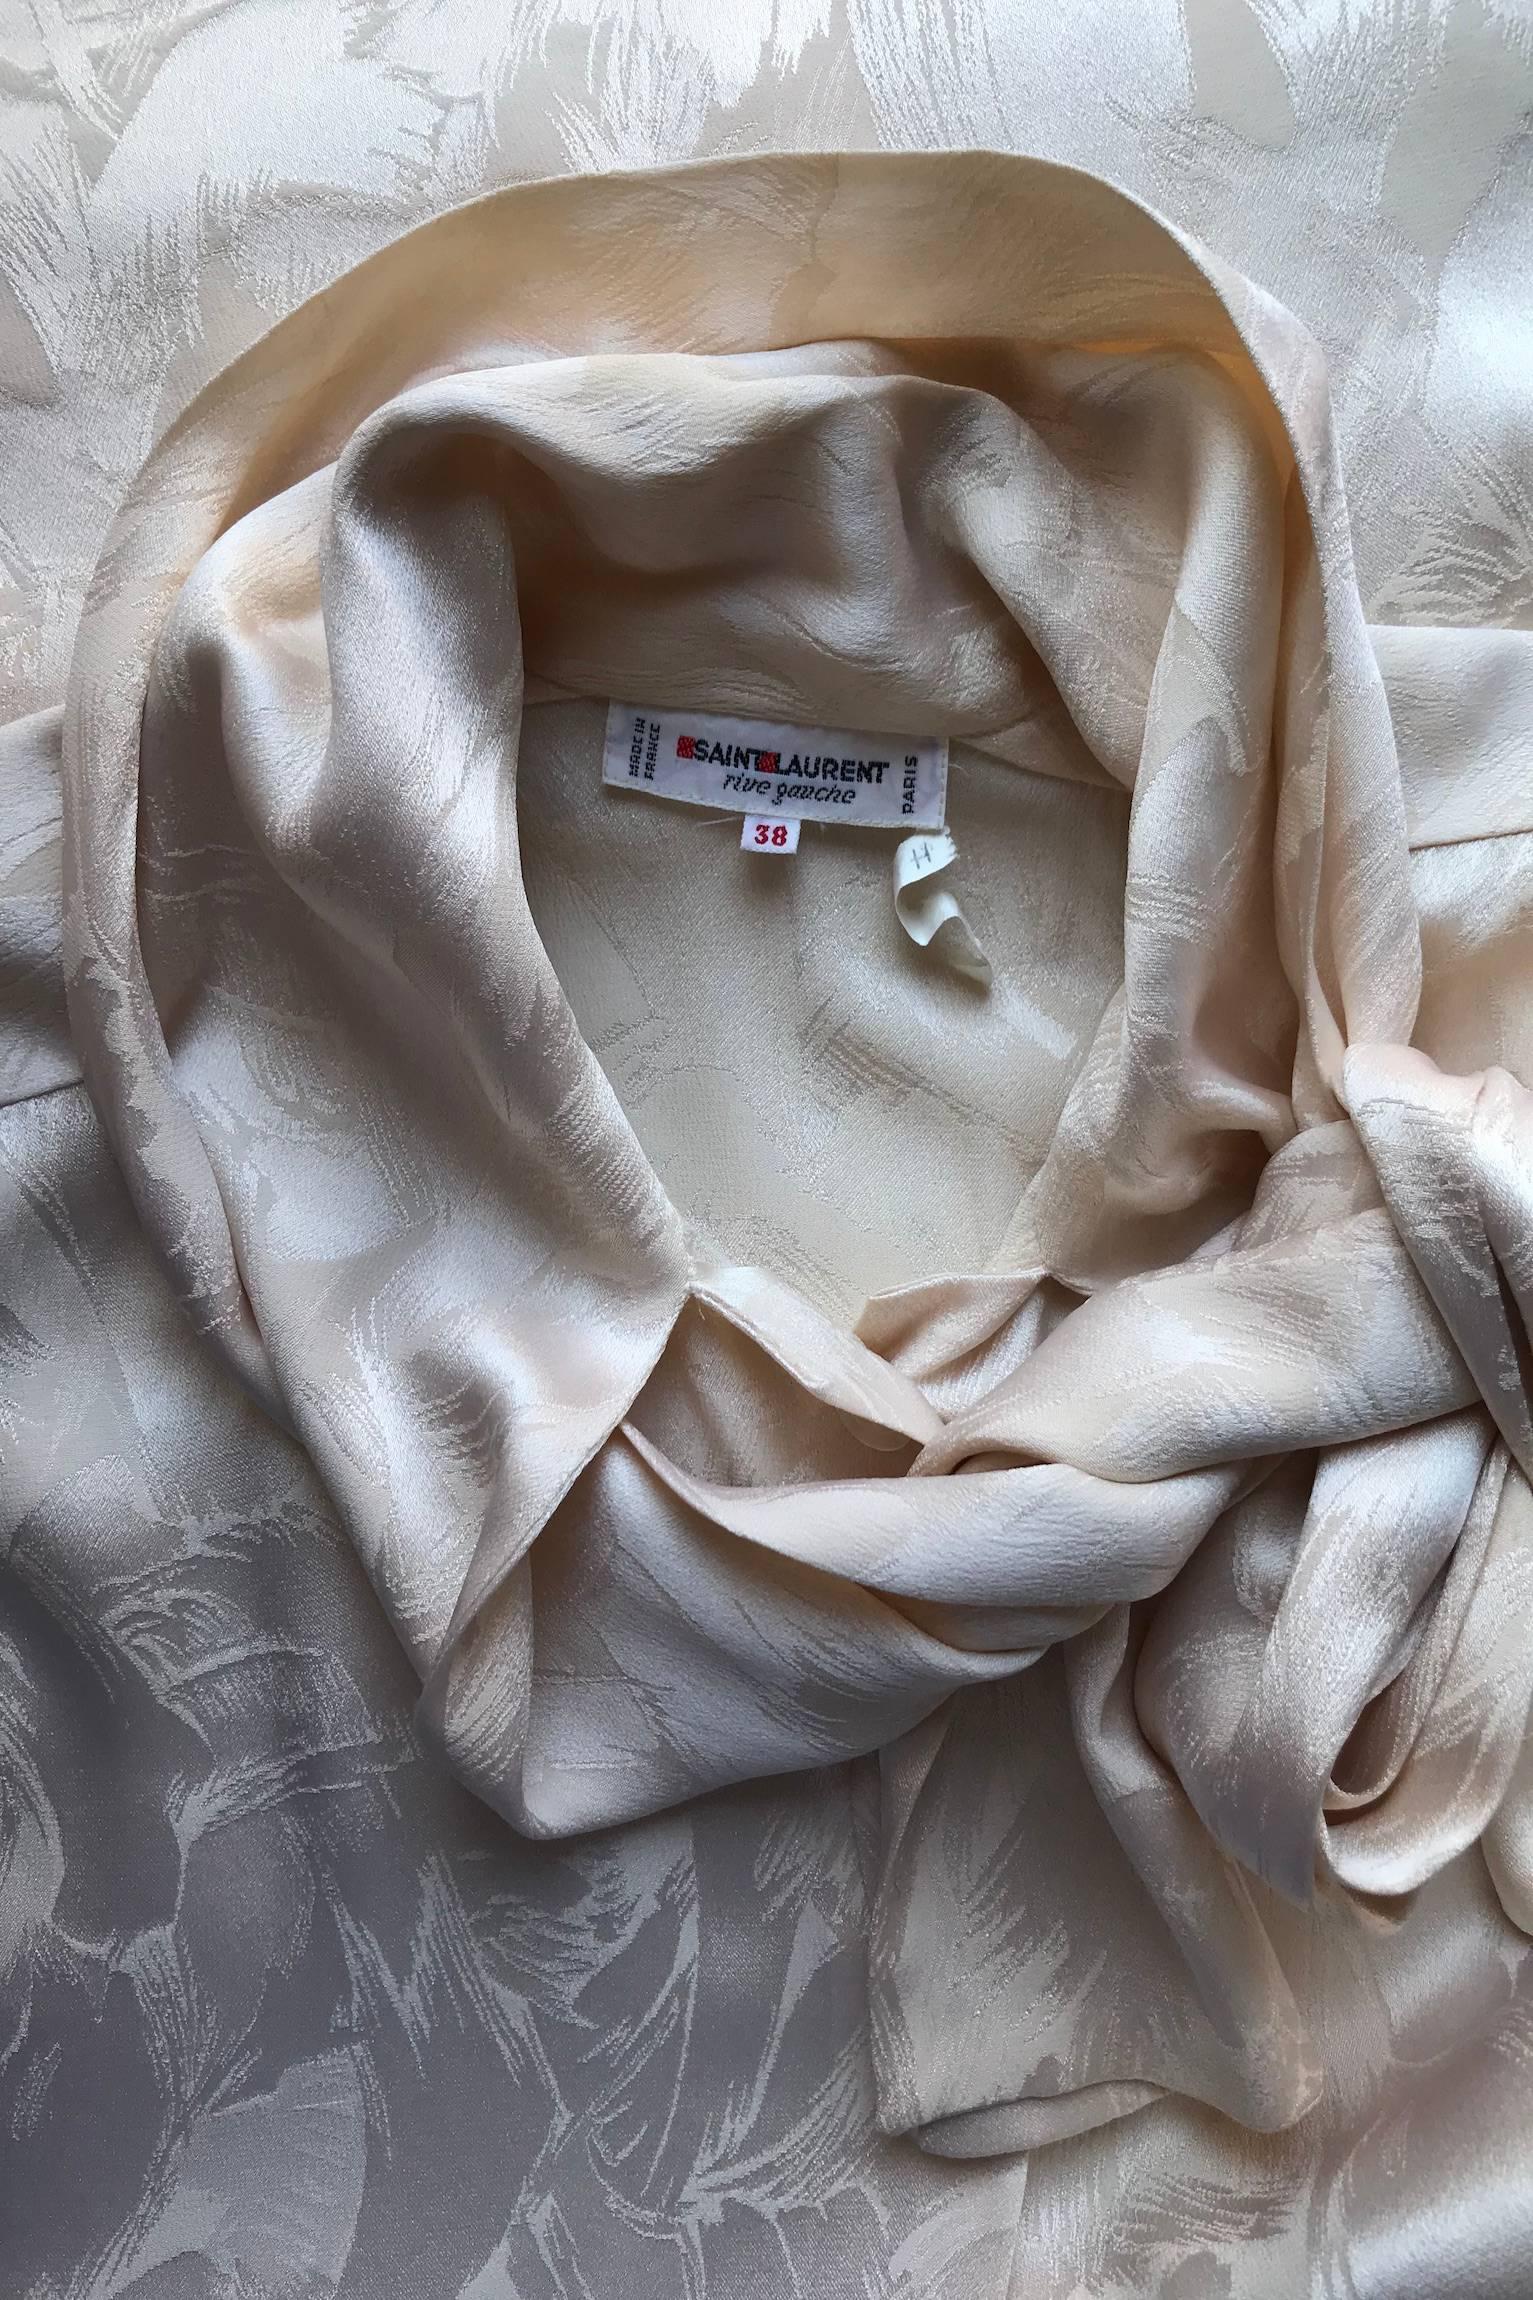 A fabulous 1980s Yves Saint Laurent Rive Gauche ivory silk blouse with long sleeves, one button cuff and a front button closure. The blouse has a beautiful jacquard woven feathers and a bow collar. 

The size of the blouse corresponds to a modern